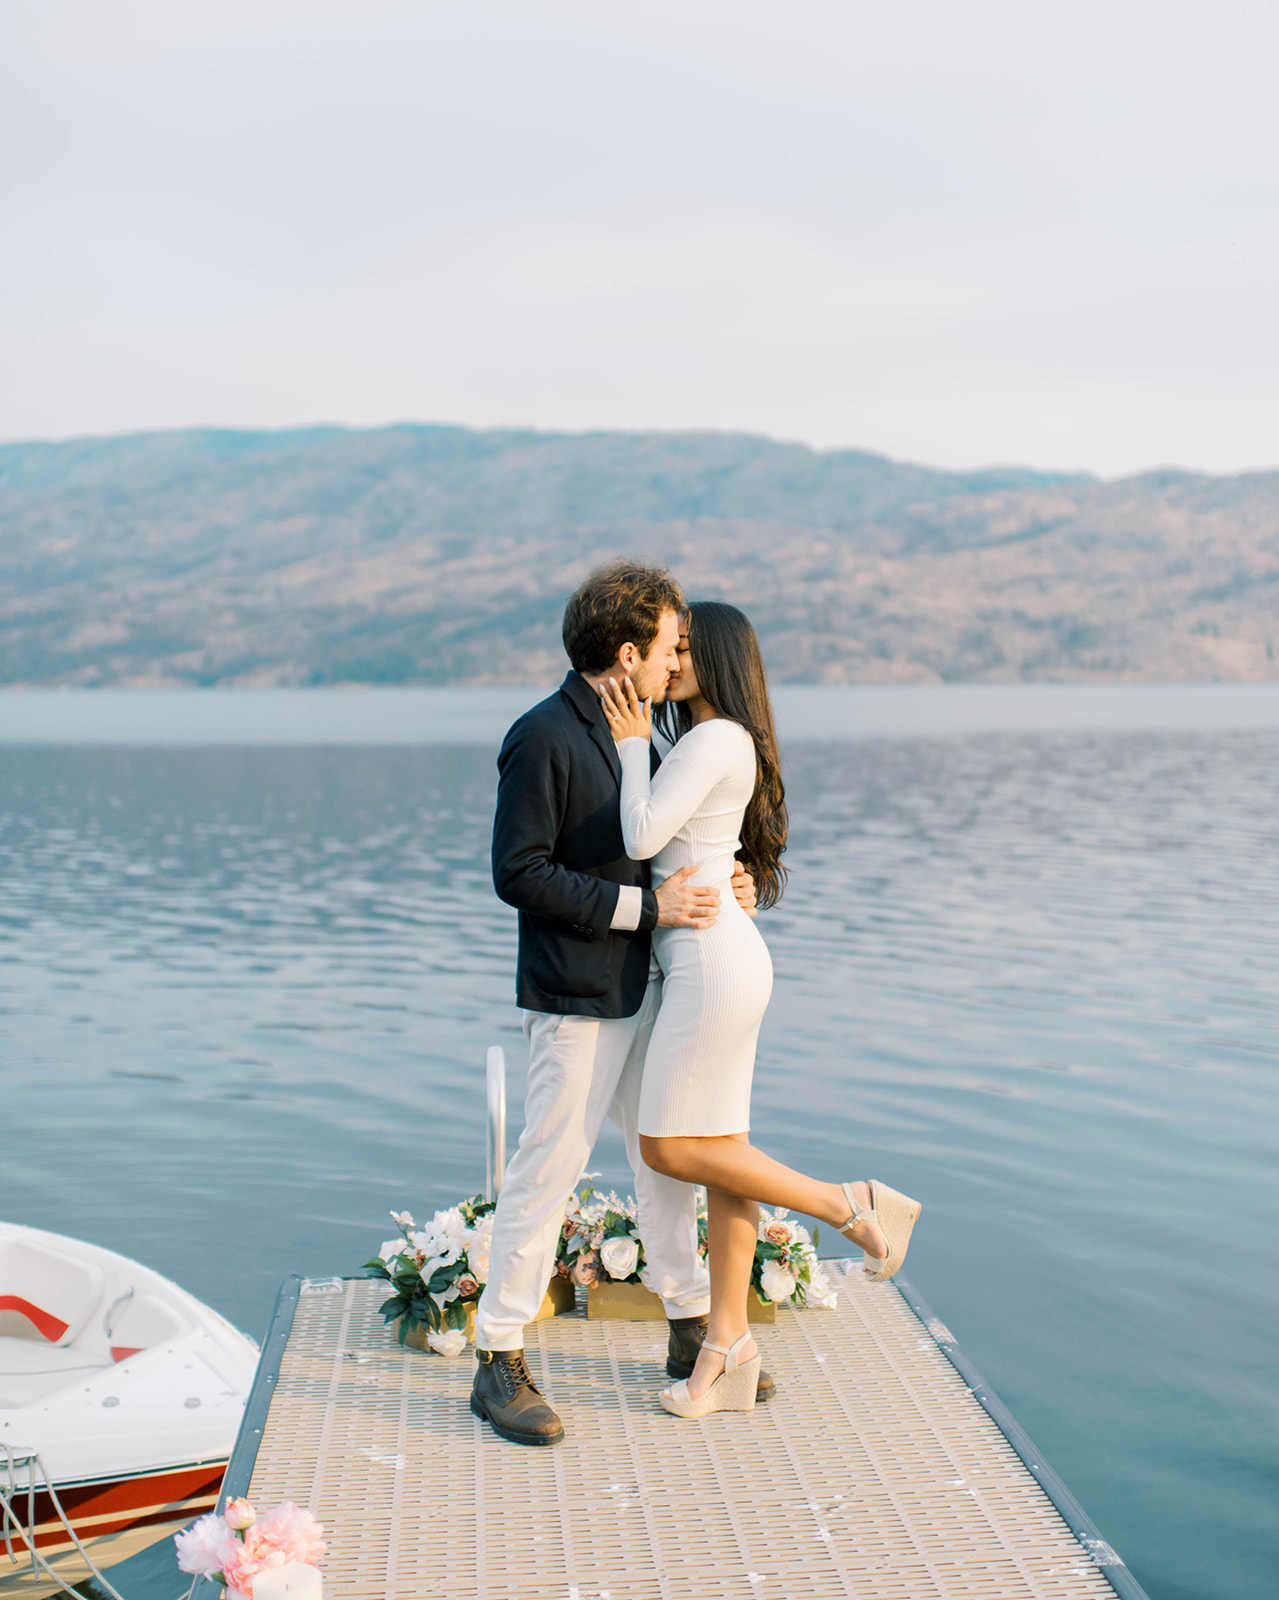 Perfectly Planned Romantic Proposal at Peachland Beach, in the Okanagan Valley, captured on film by Kelowna Wedding Photographer, Minted Photography. - summer proposal ideas, surprise proposal, romantic proposal inspiration, romantic proposal ideas